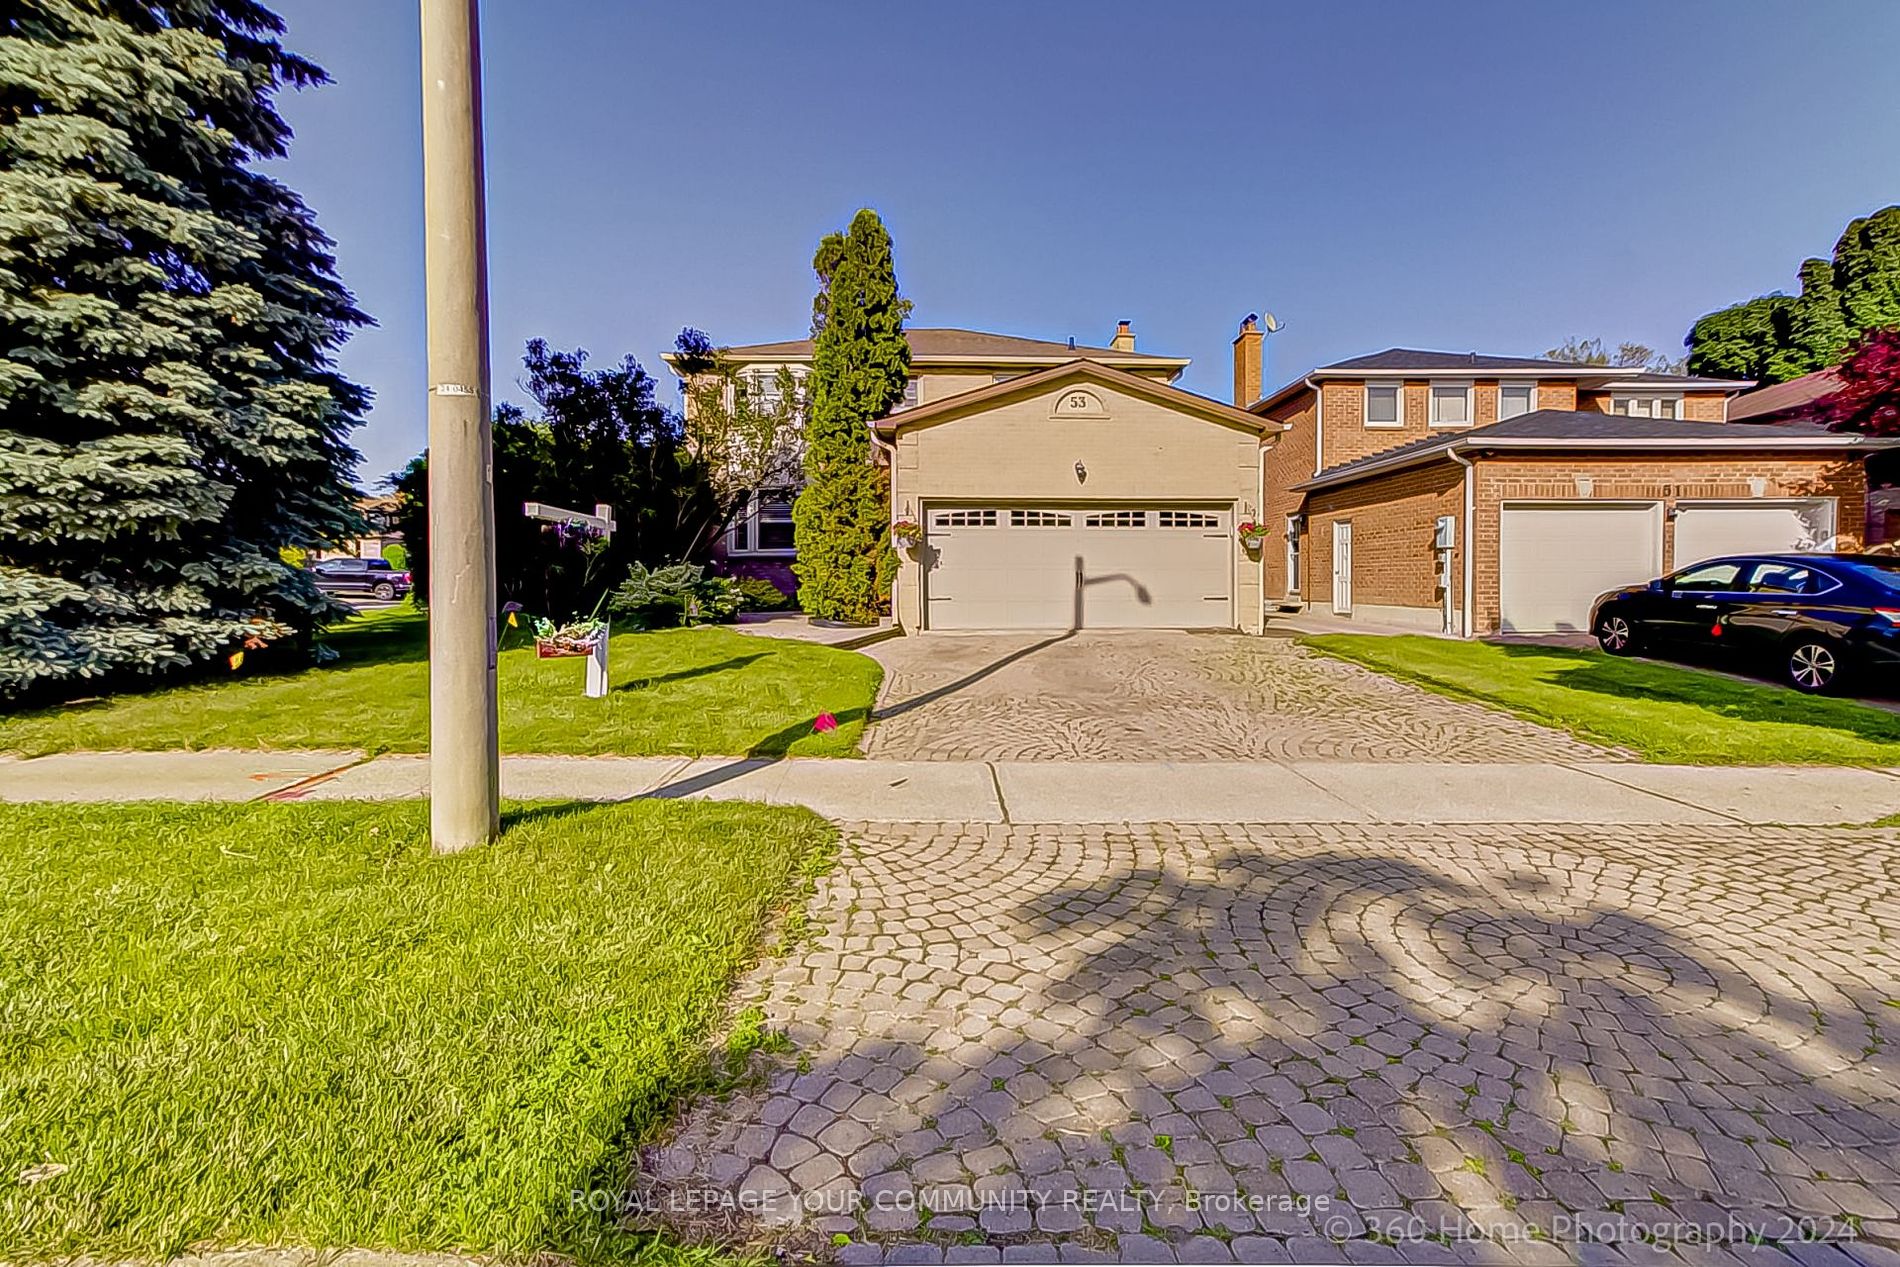 Detached house for sale at 53 Marsh St Richmond Hill Ontario